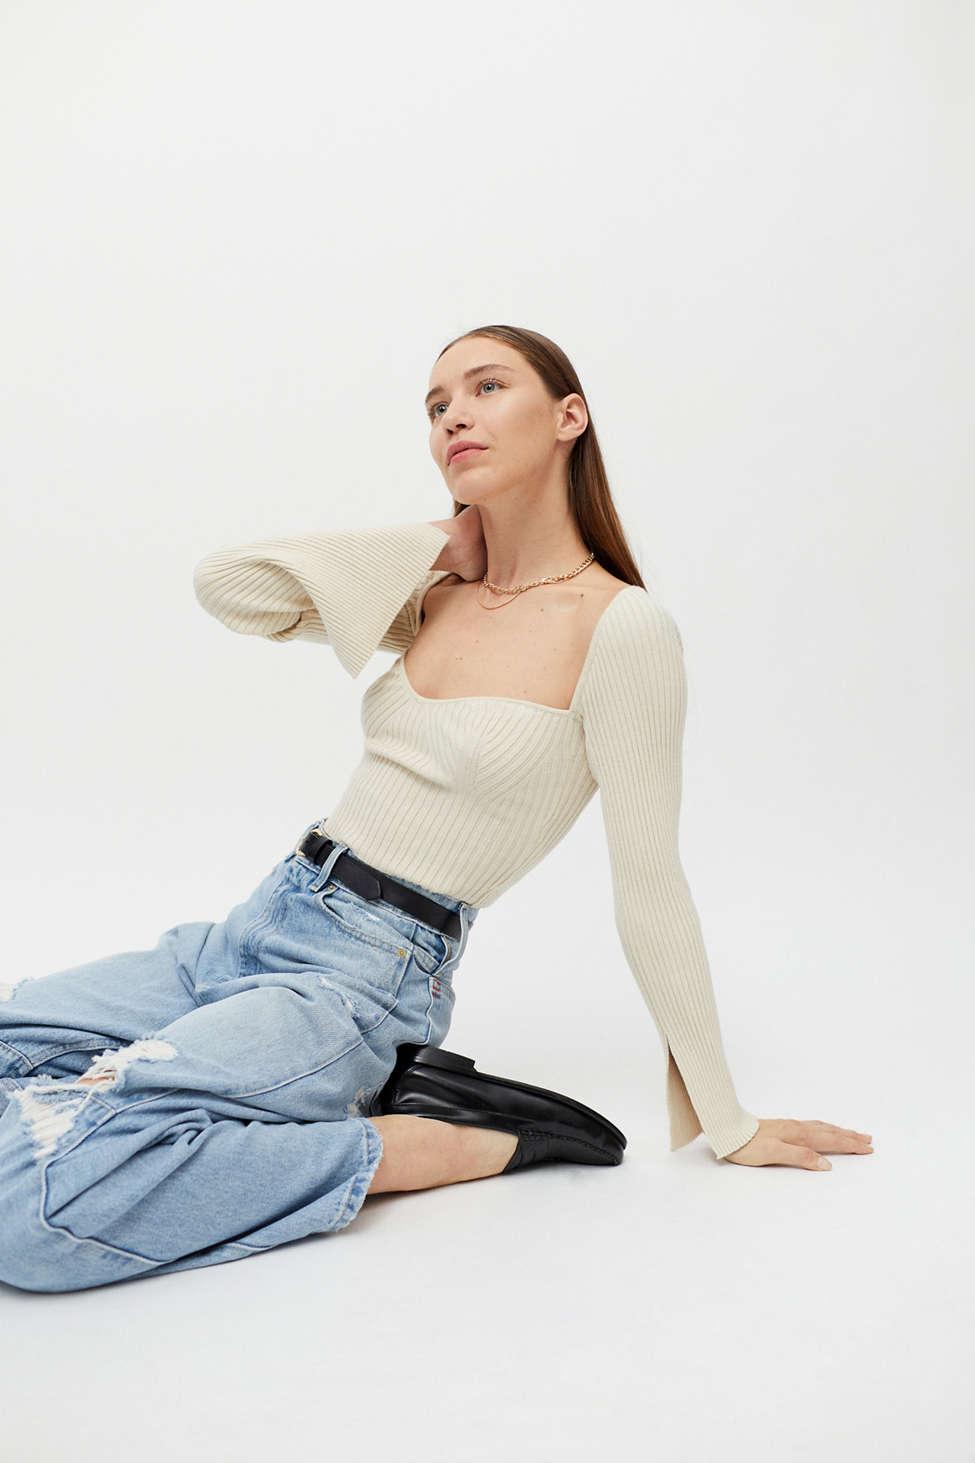 Title: Urban Outfitters Uo Juliet Portrait Neck Sweater in Cream (Natural ...